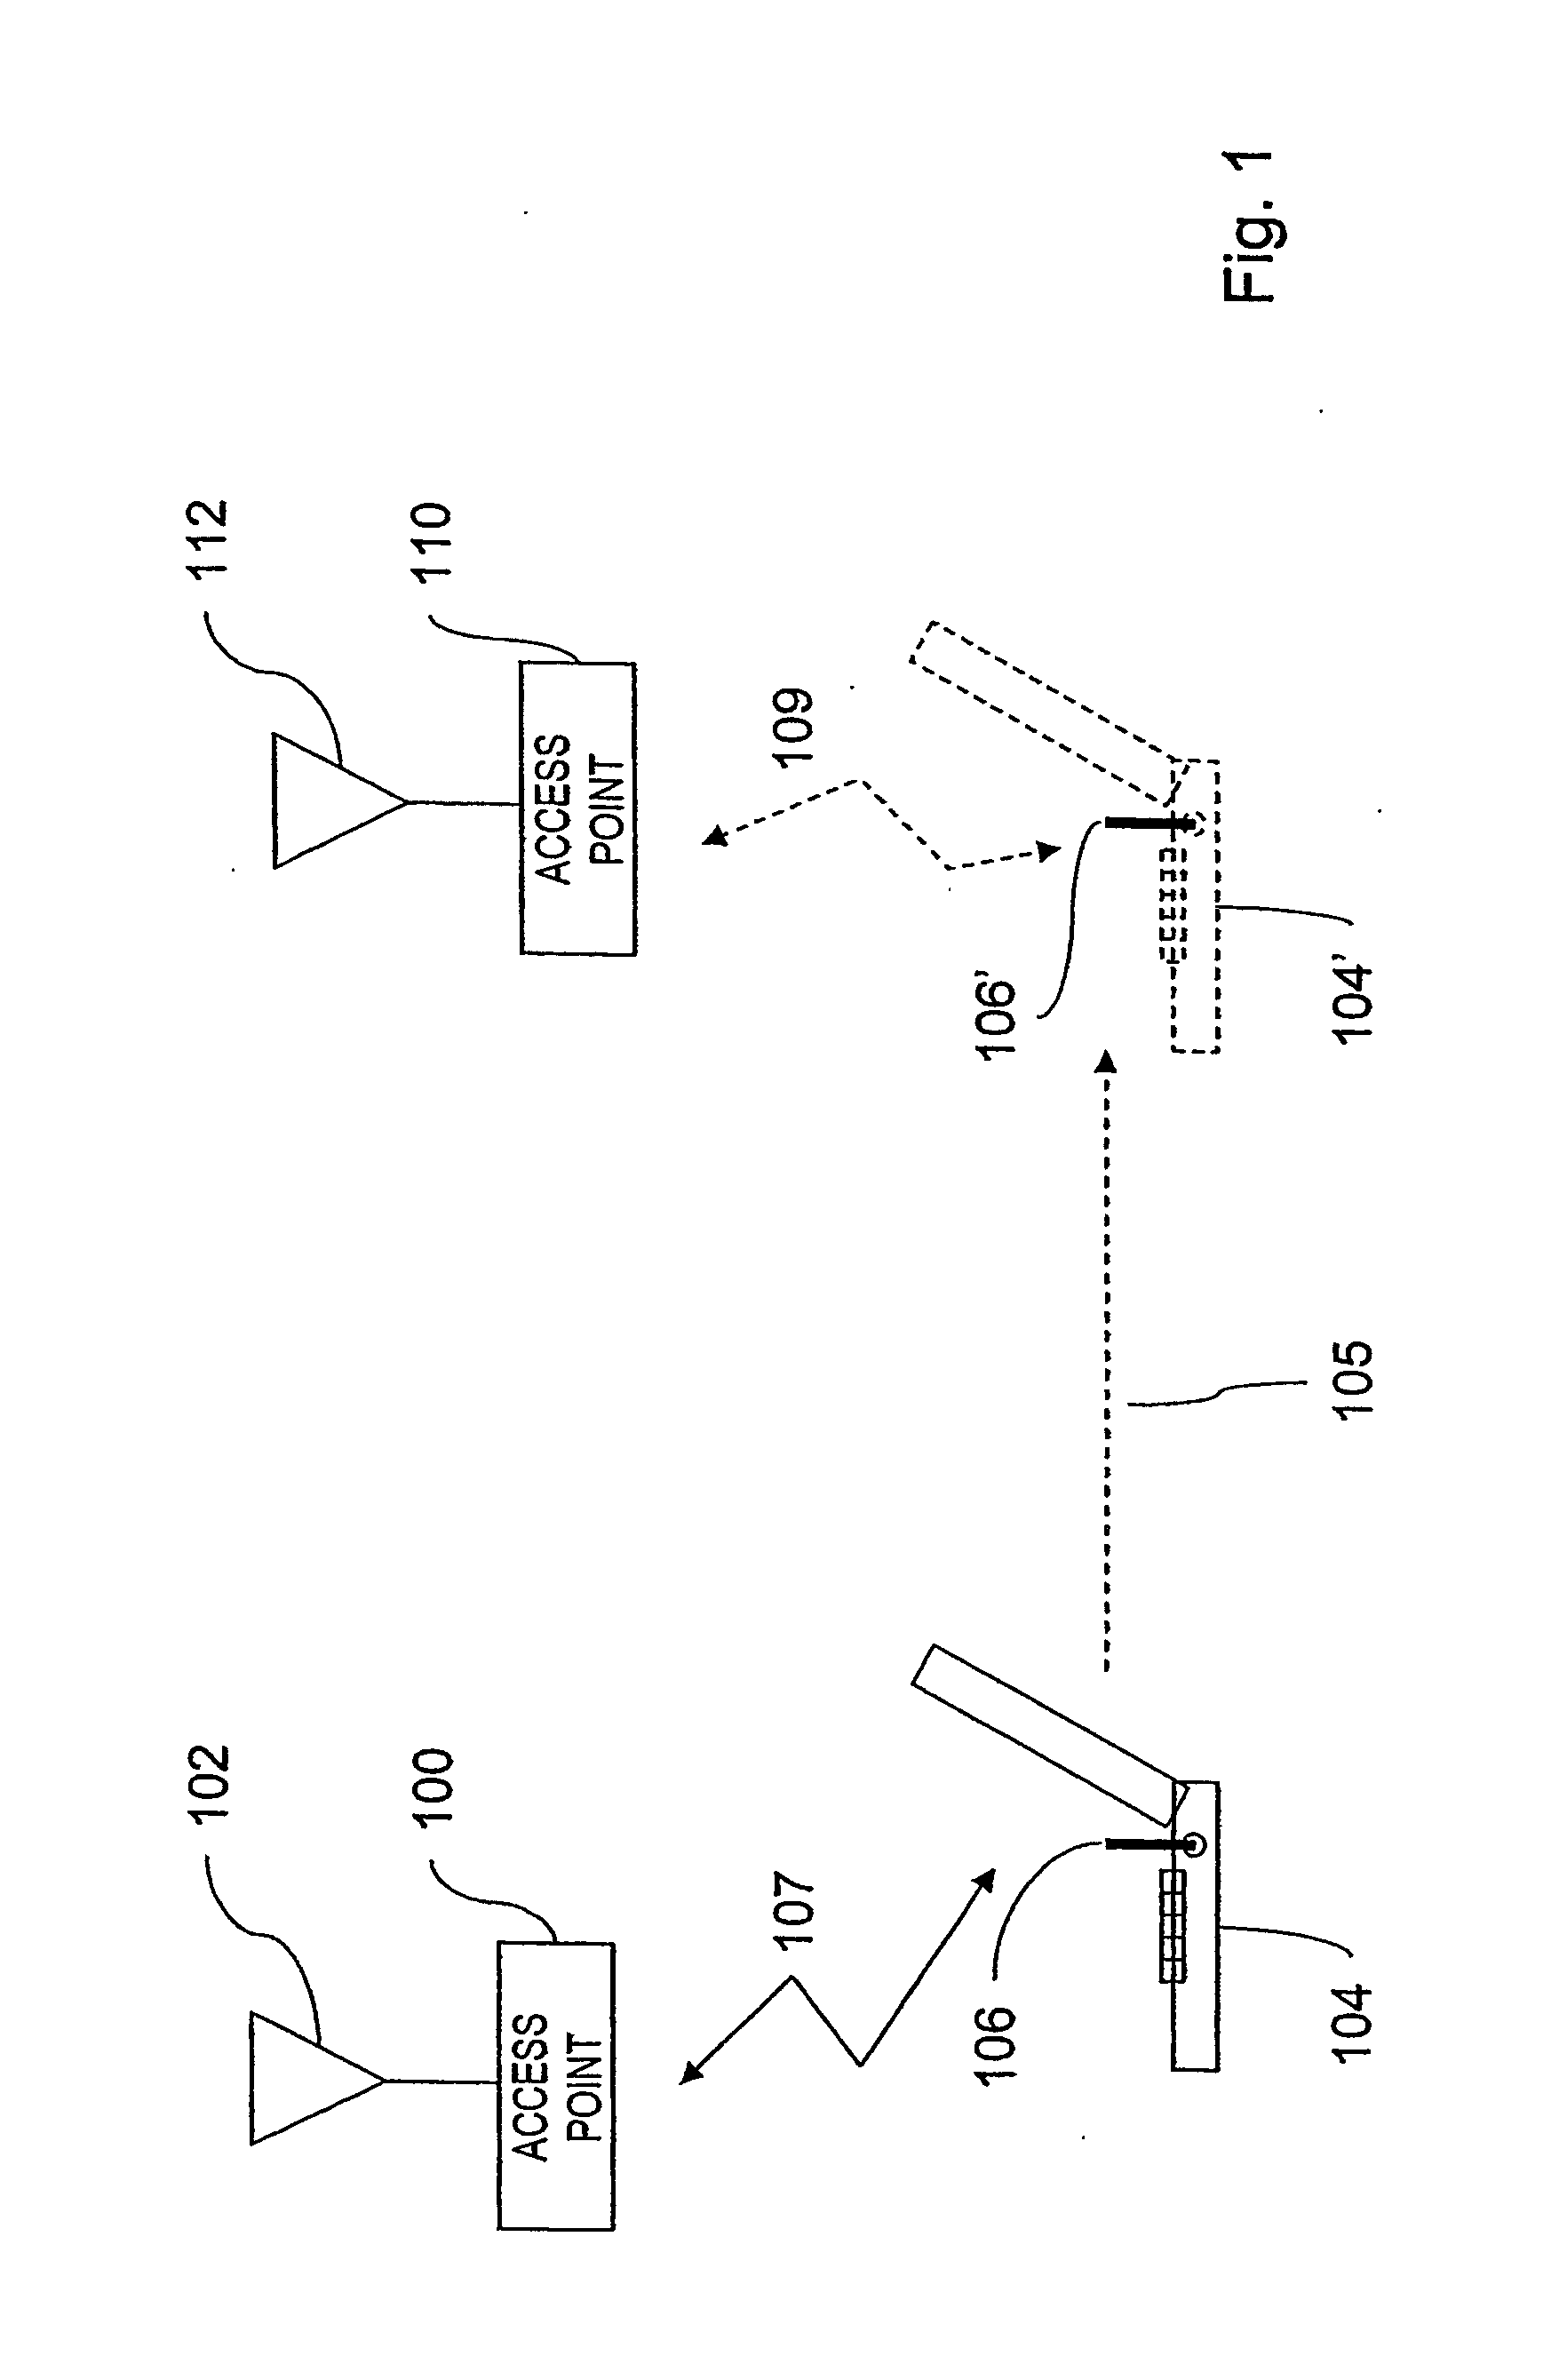 Method for reducing hand-off latency in mobile networks